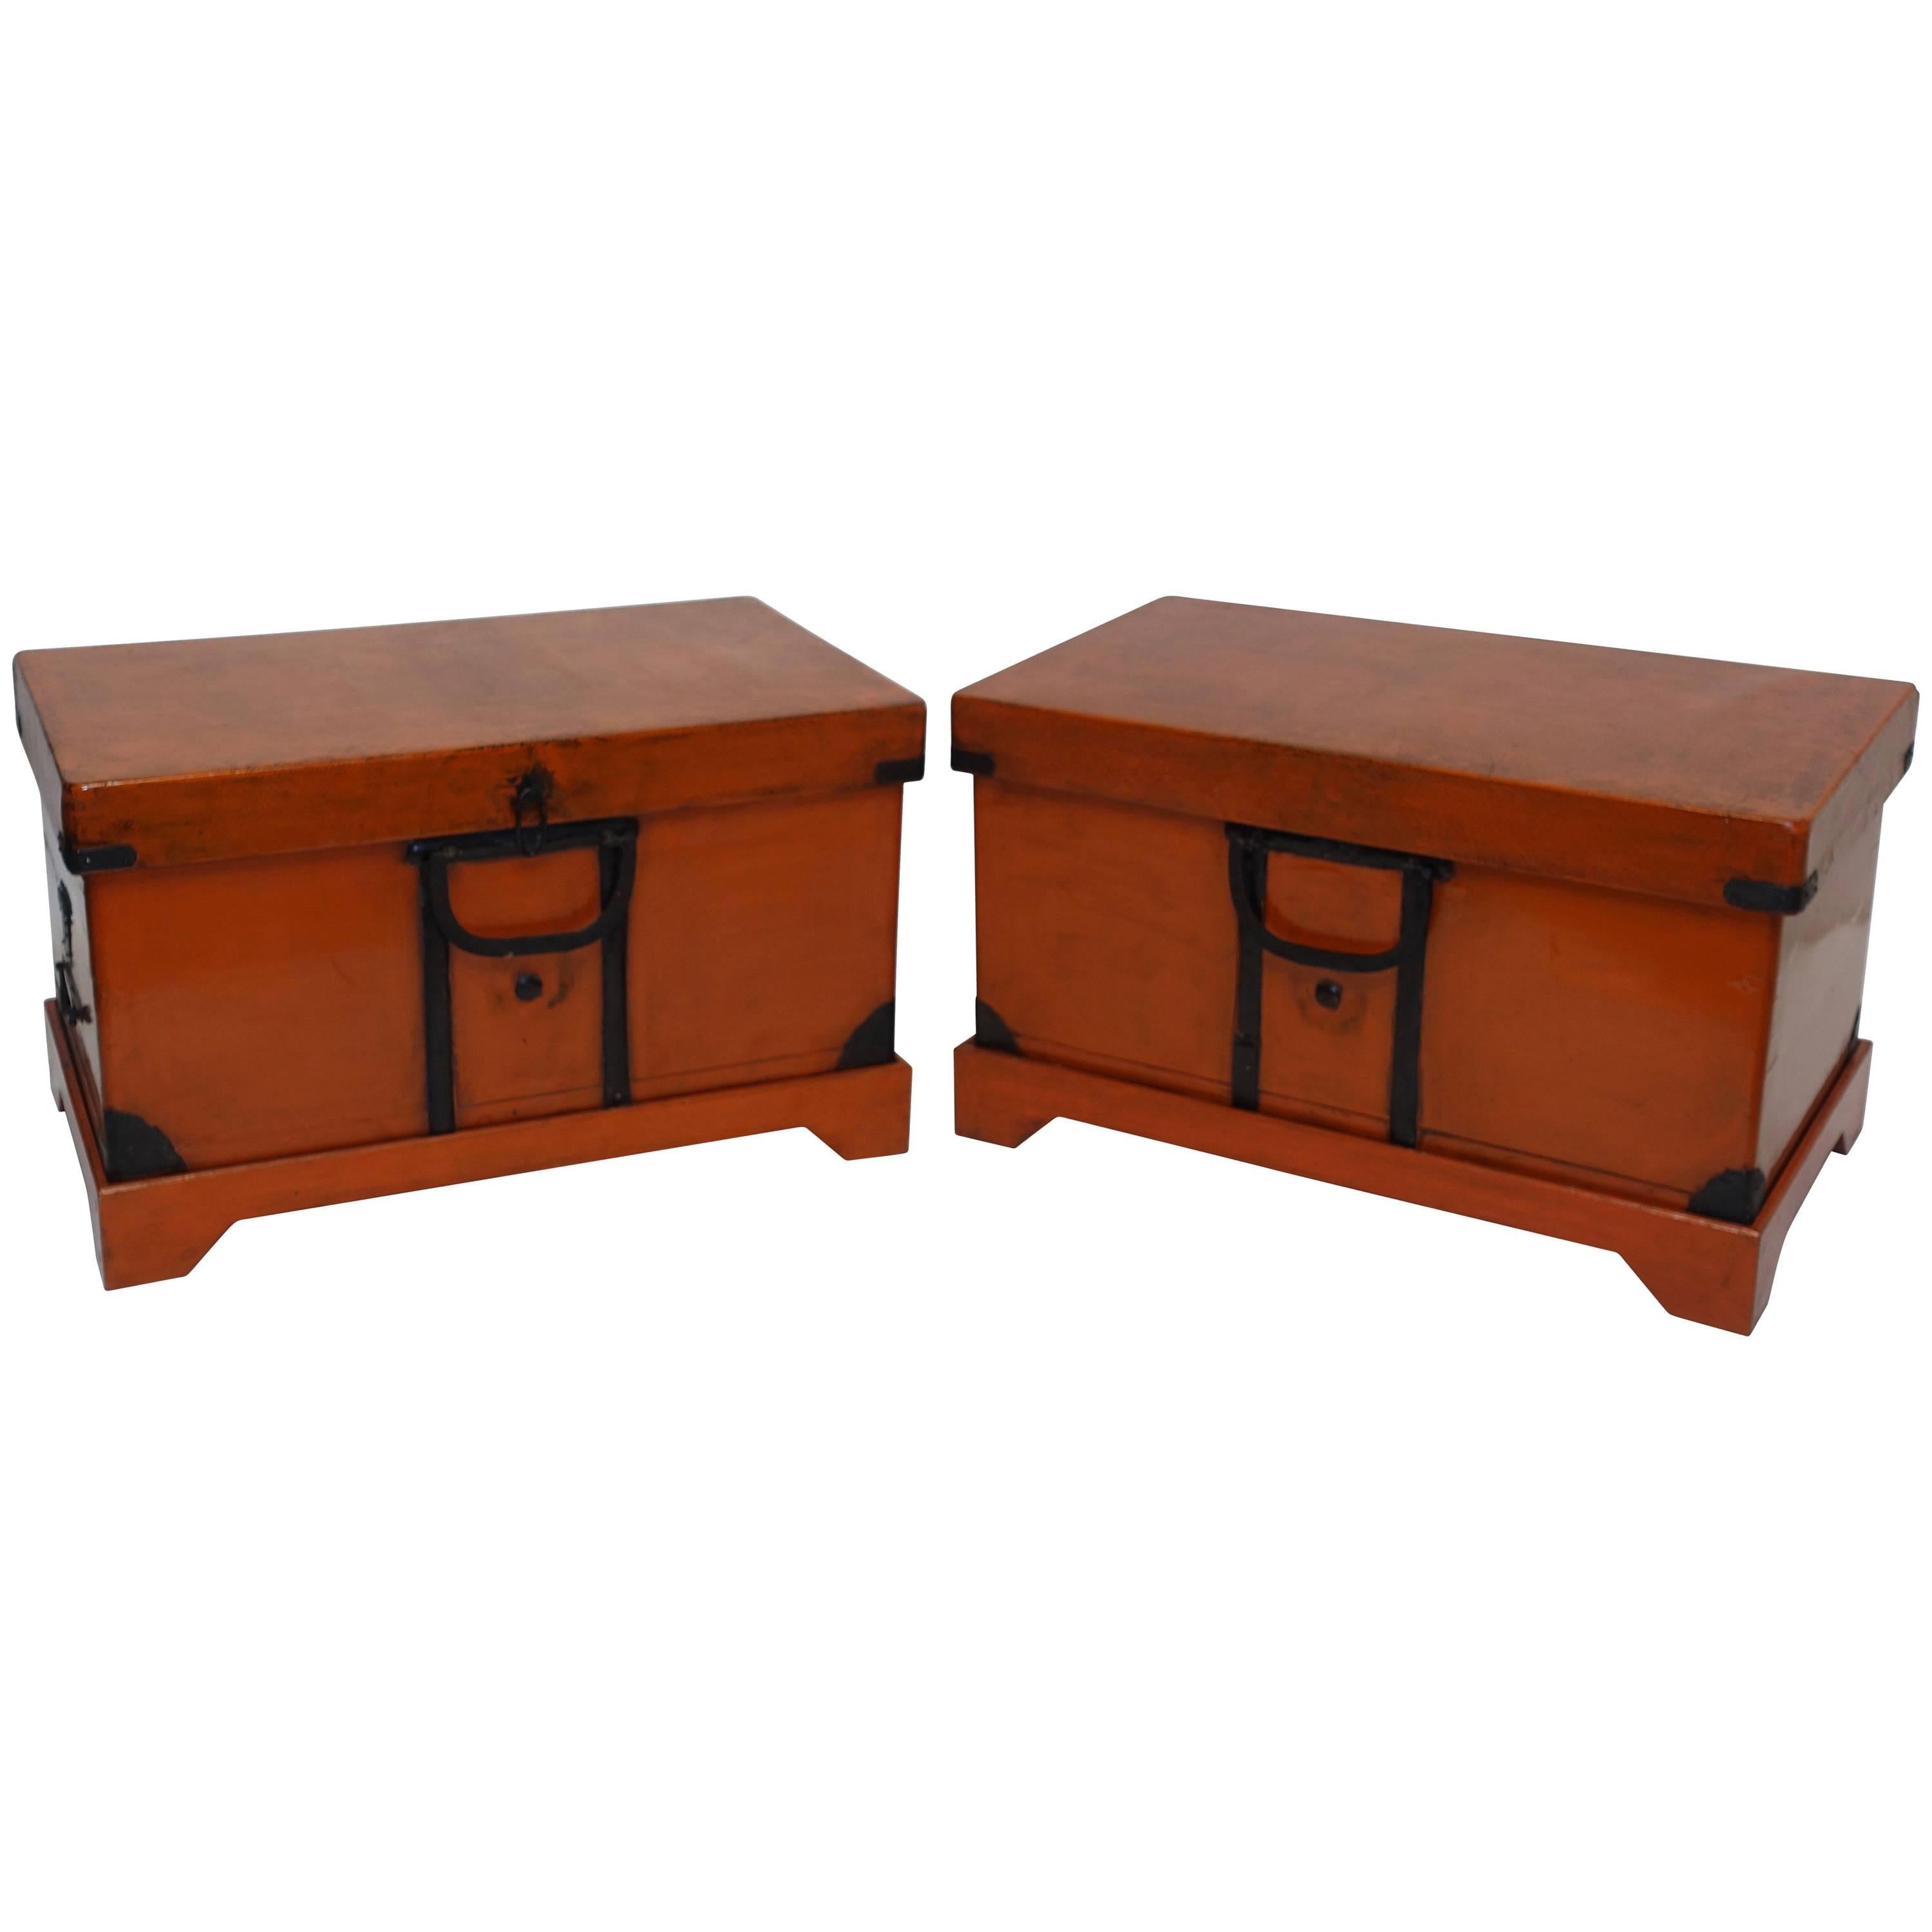 Pair of Japanese Lacquered Trunks or Tables on Custom Stands, 19th Century For Sale